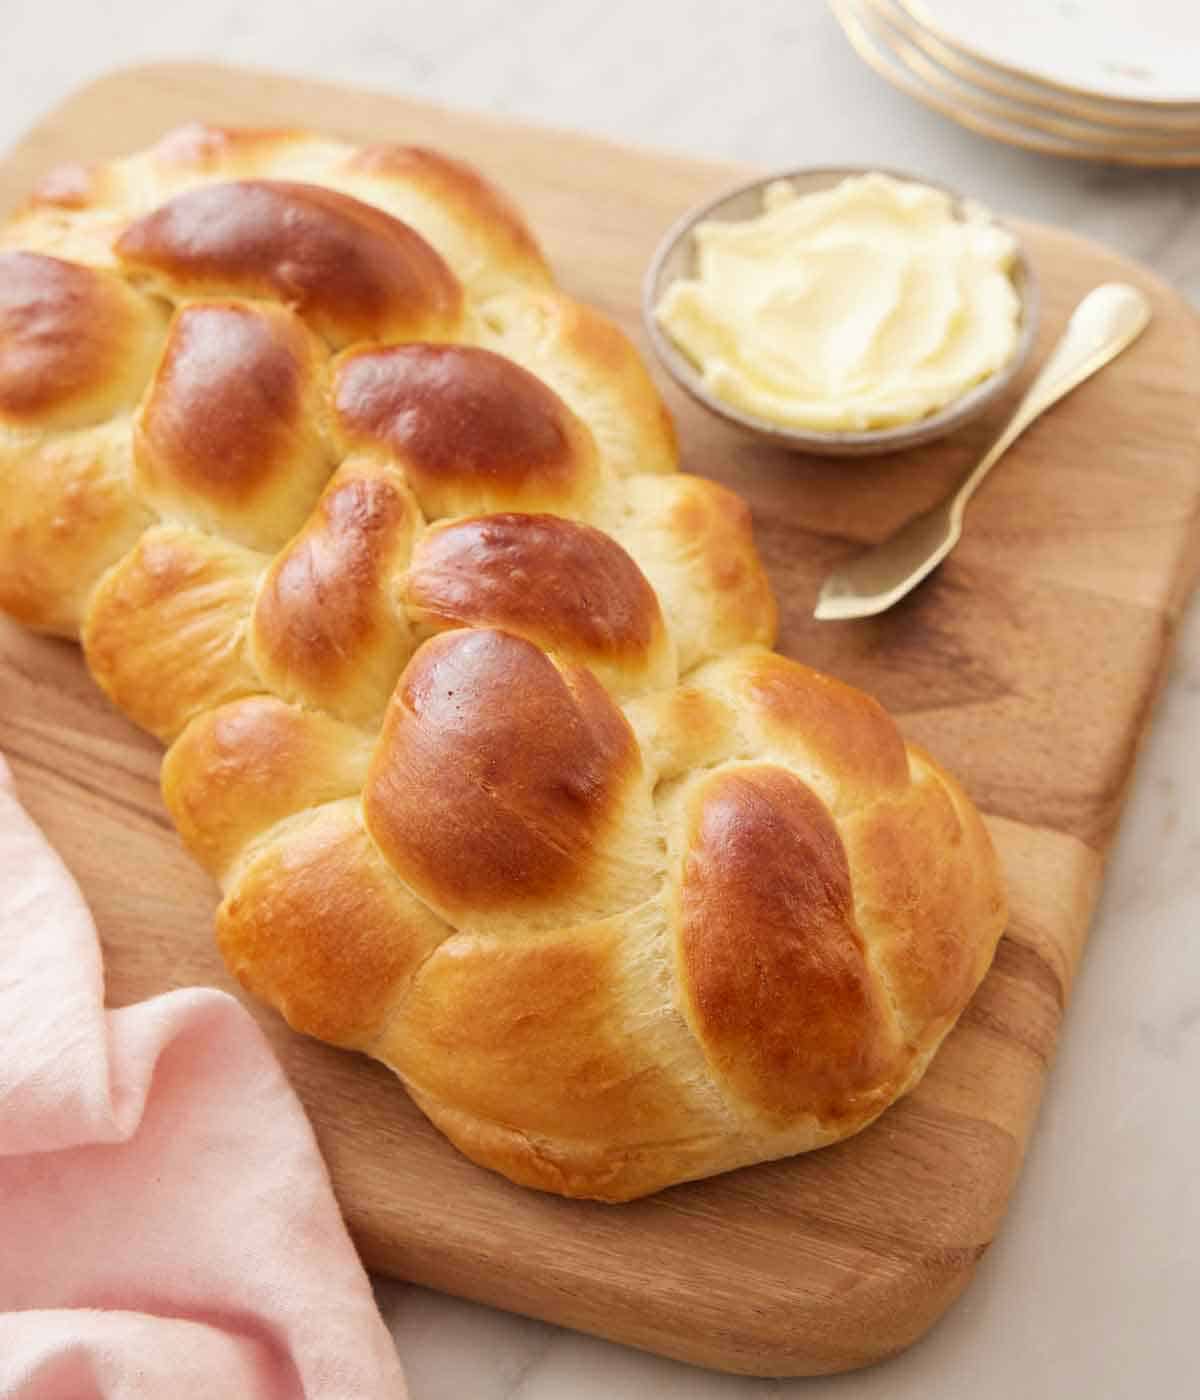 A loaf of challah on a wooden serving board with a bowl of butter with a spreader behind it.